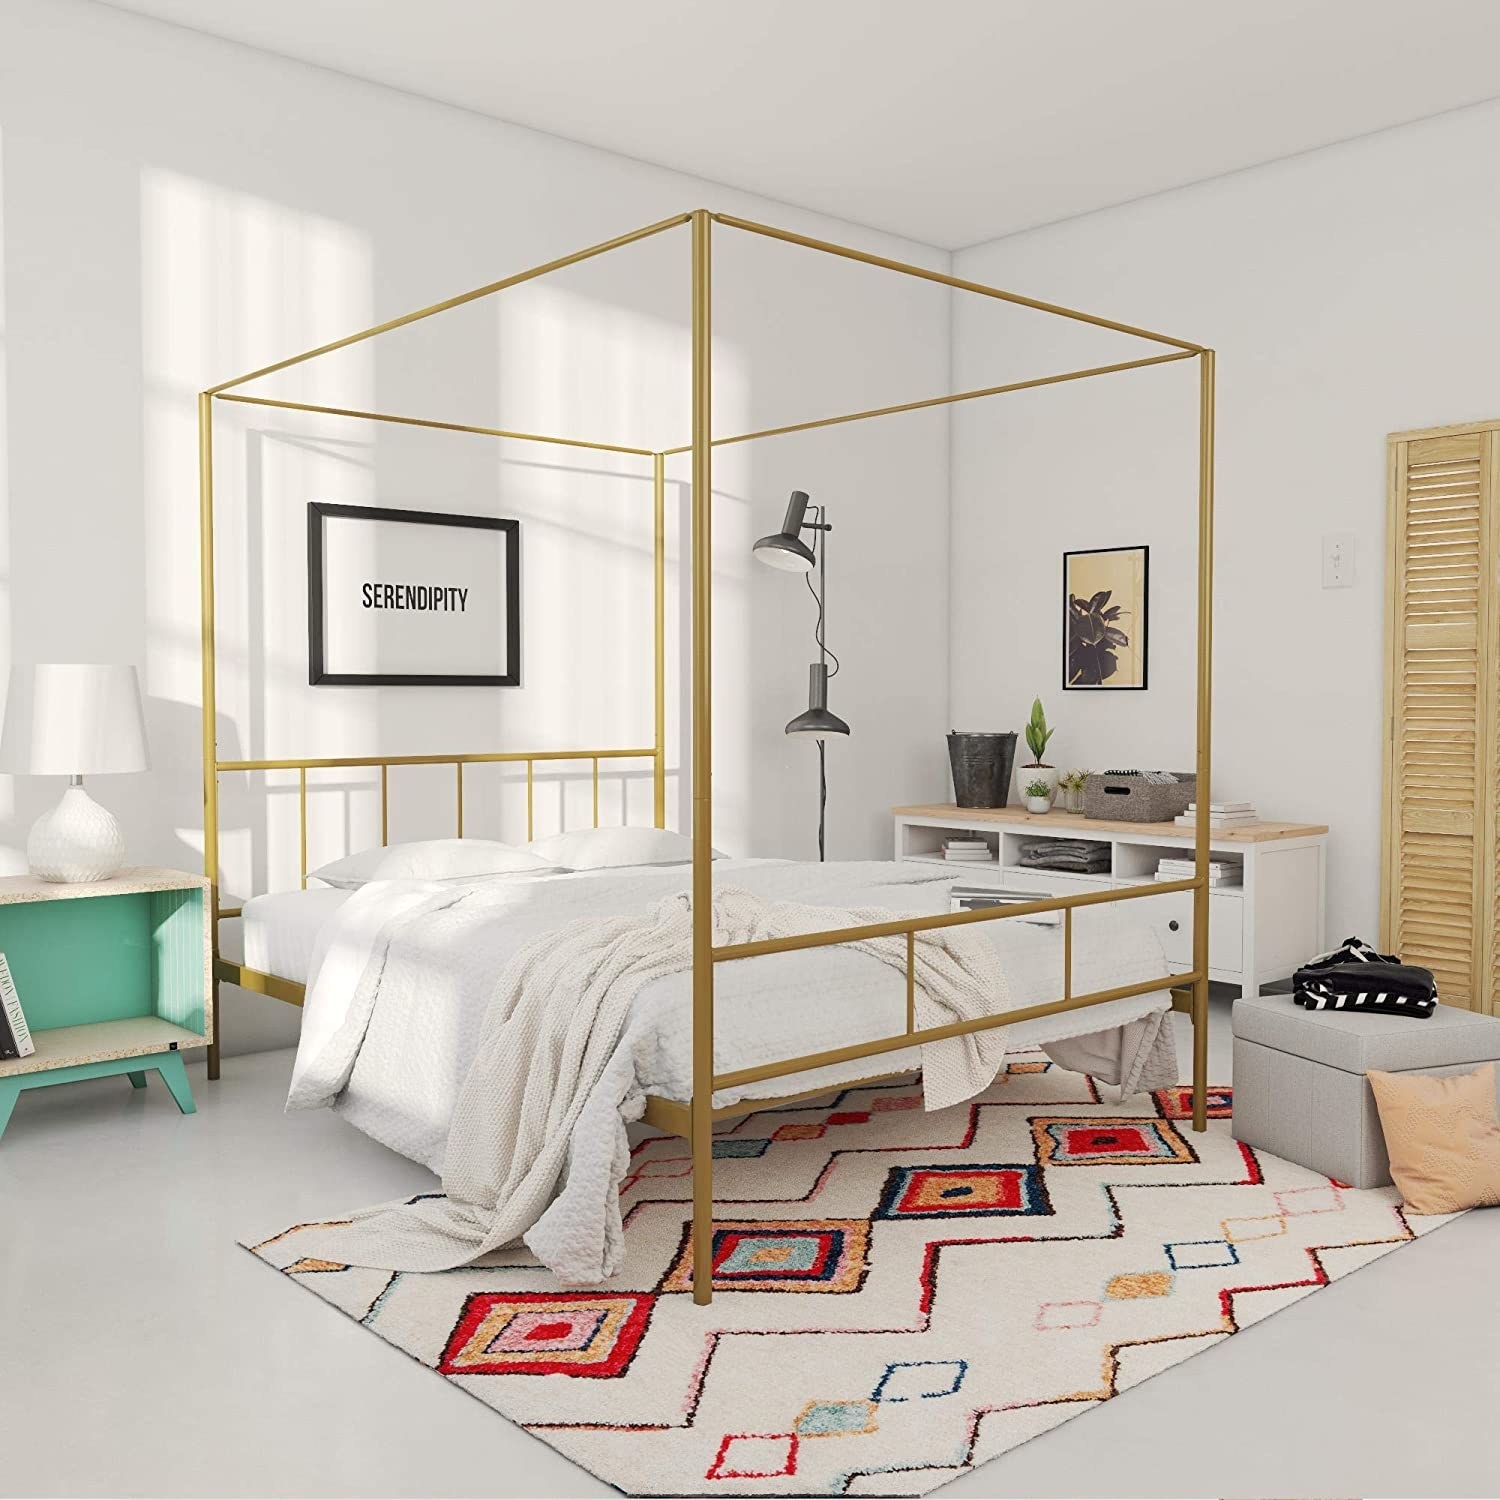 The square gold bed frame